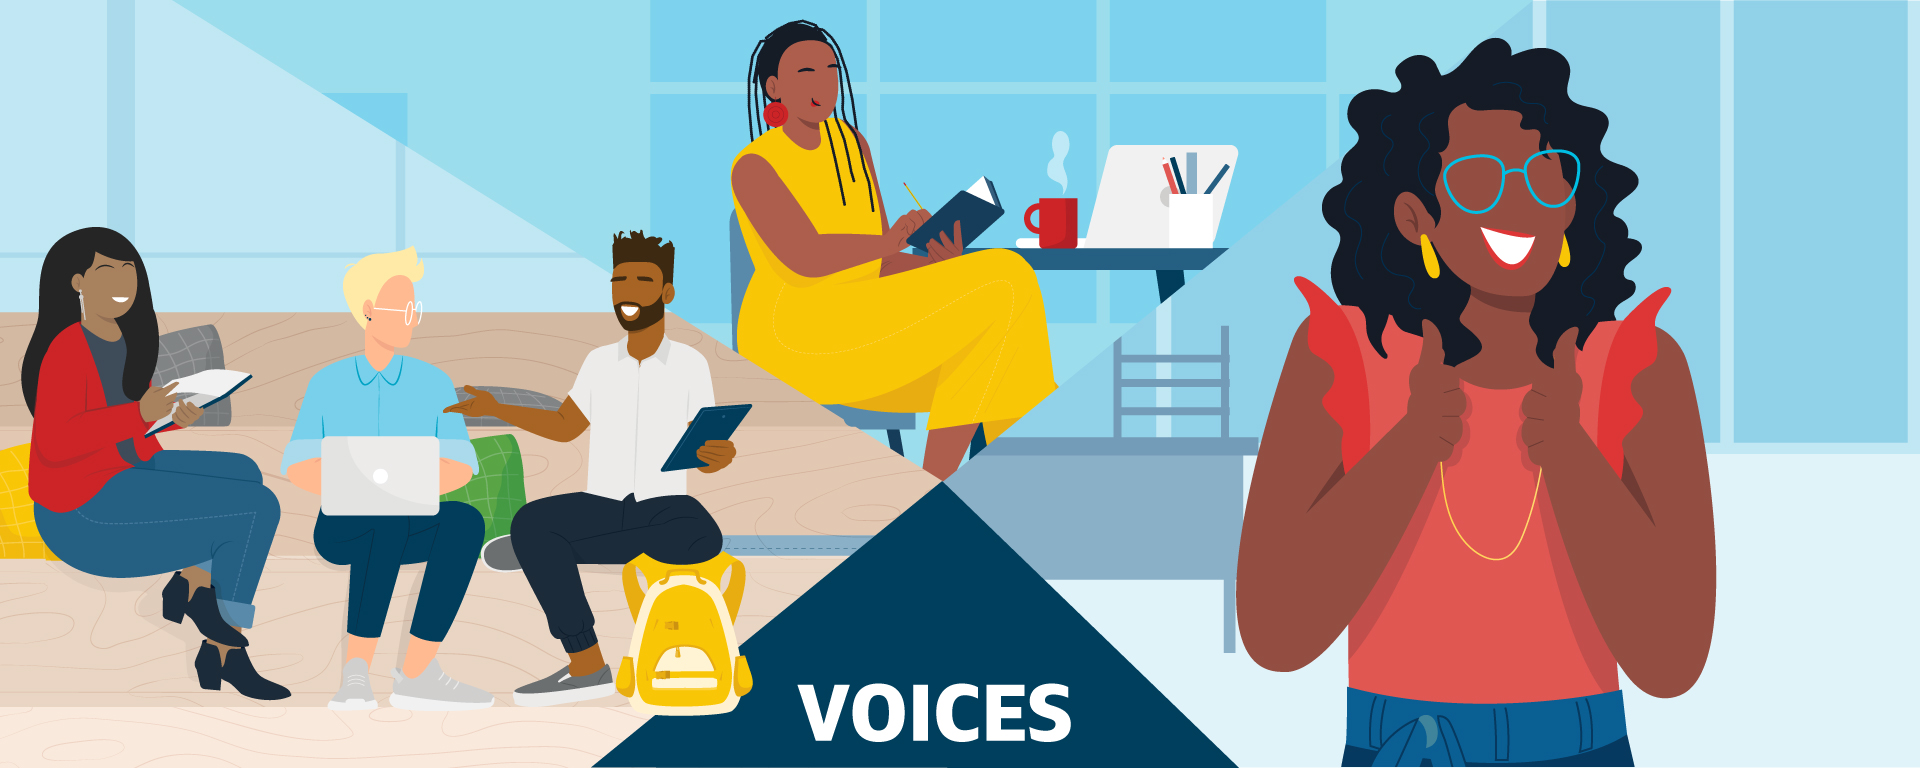 A collage of 3 animated images of Capital One Black associates with the title "VOICES"